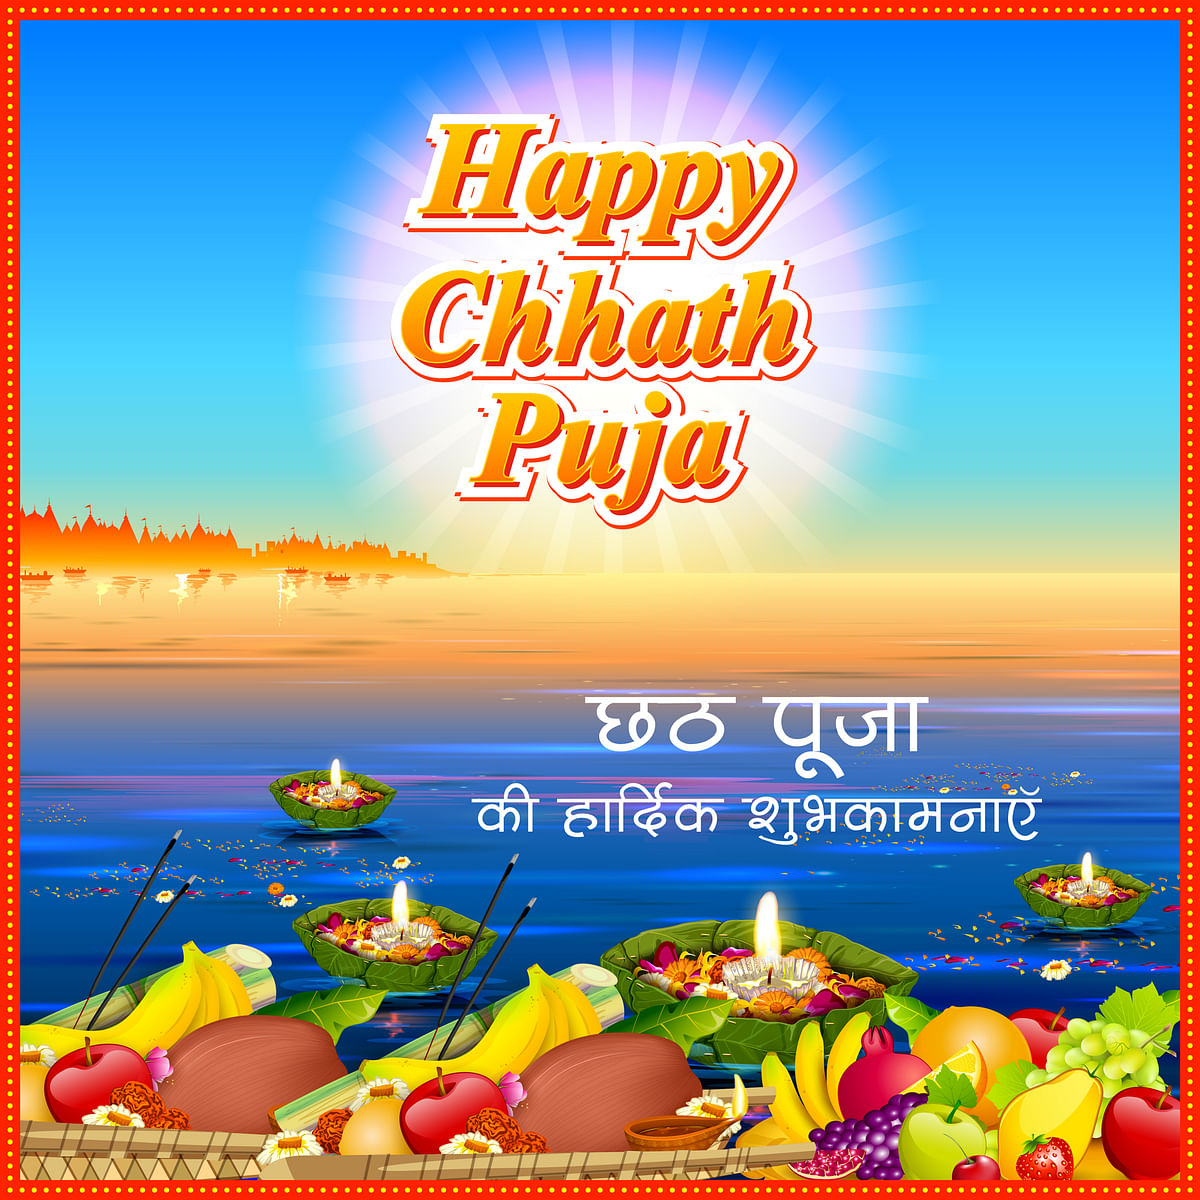 Happy Chhath Puja 2019 Images Wishes In Hindienglishbhojpuri Chhath Puja Greetings Cards 0855